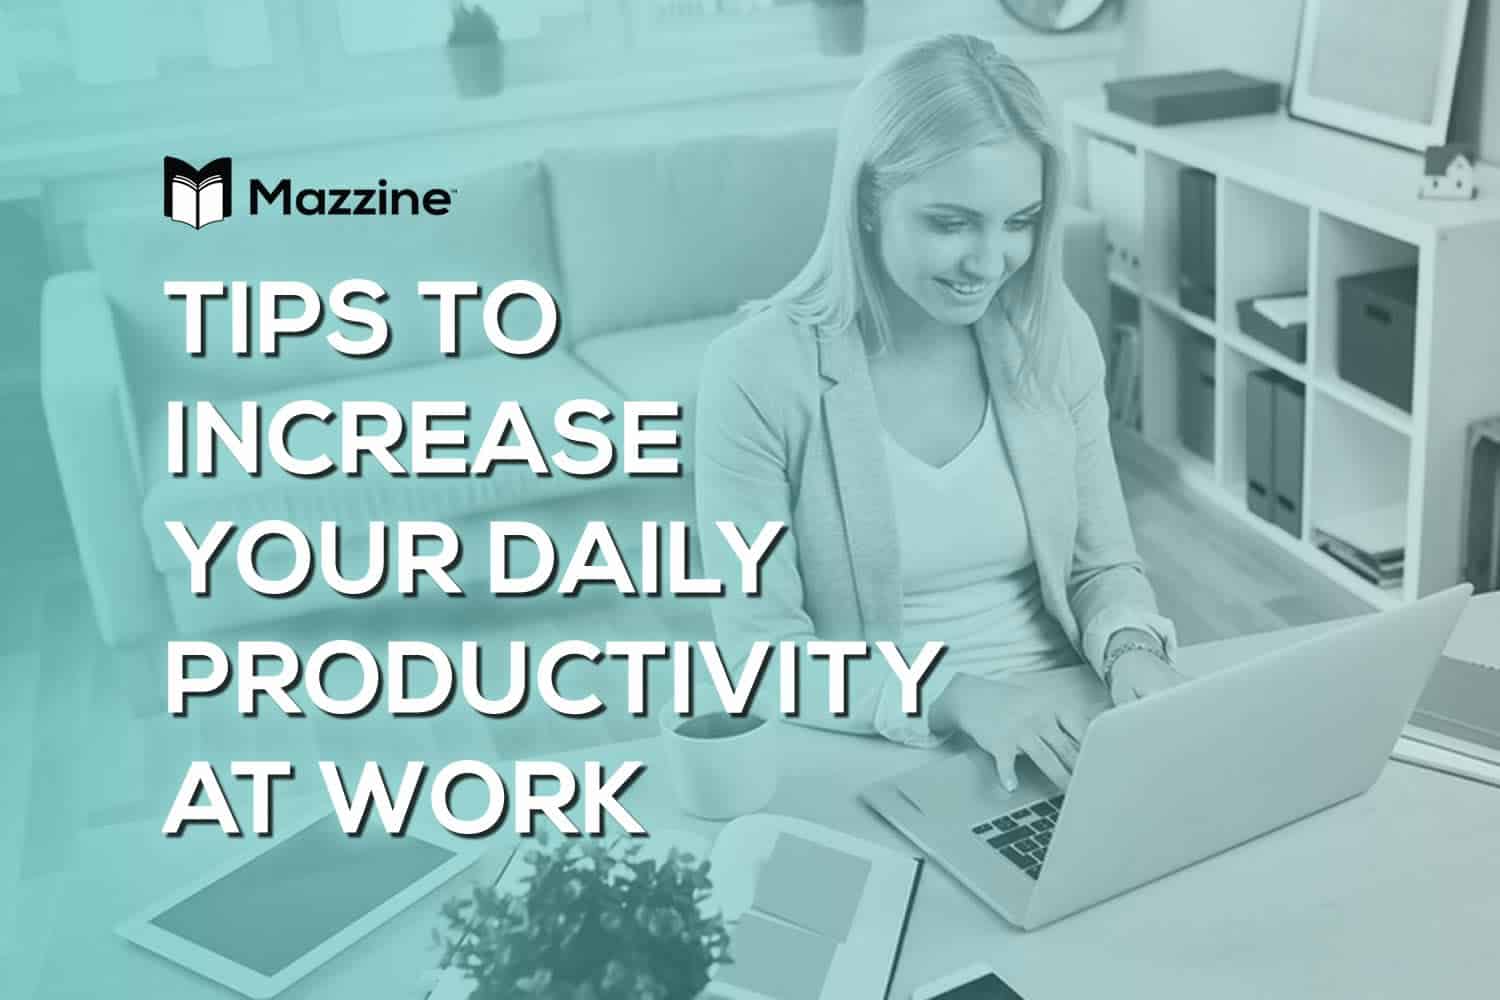 Tips to Increase Your Daily Productivity at Work